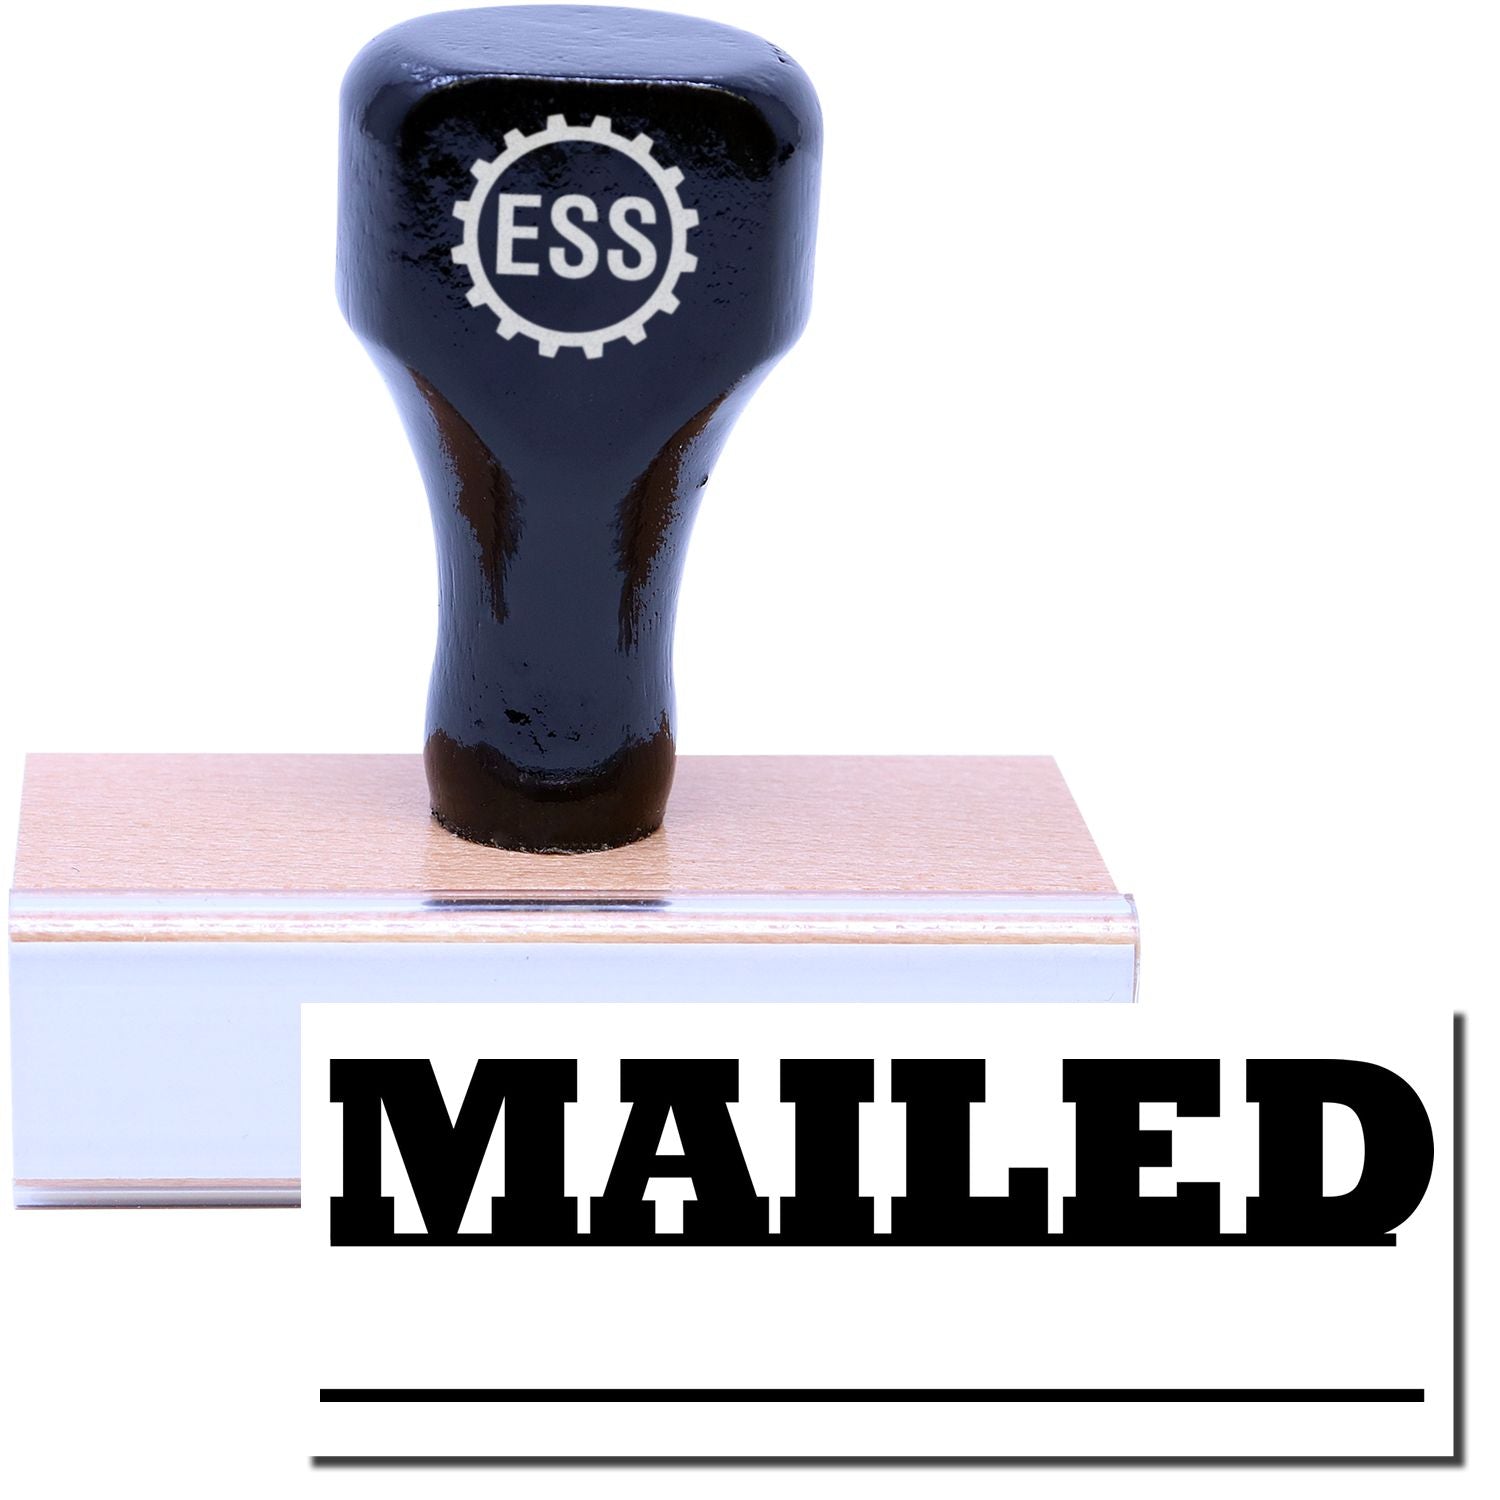 A stock office rubber stamp with a stamped image showing how the text "MAILED" in a bold font with a date line underneath the text is displayed after stamping.